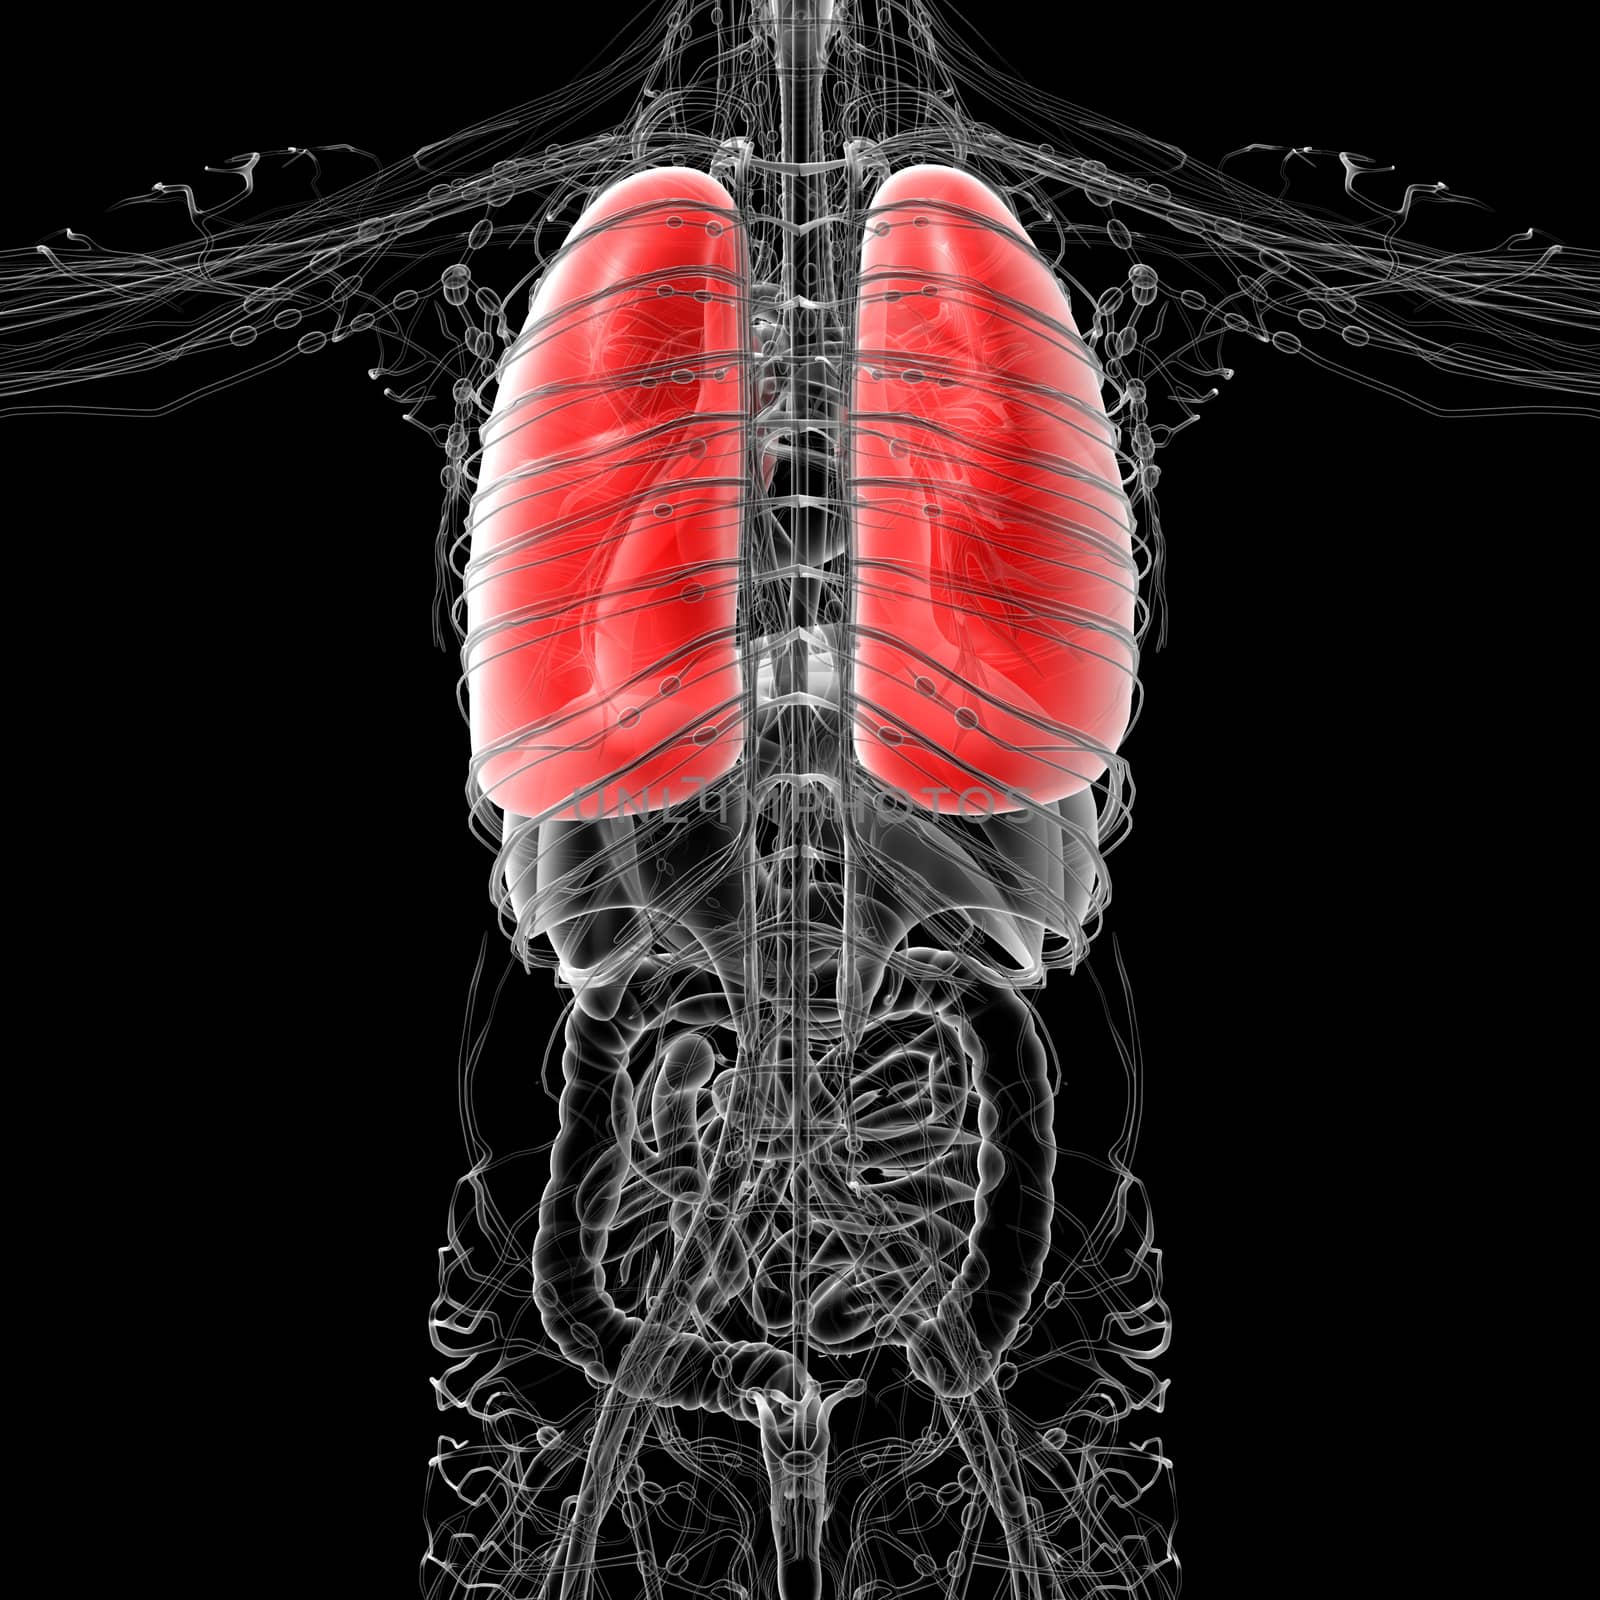 3D medical illustration of the human lung - back view